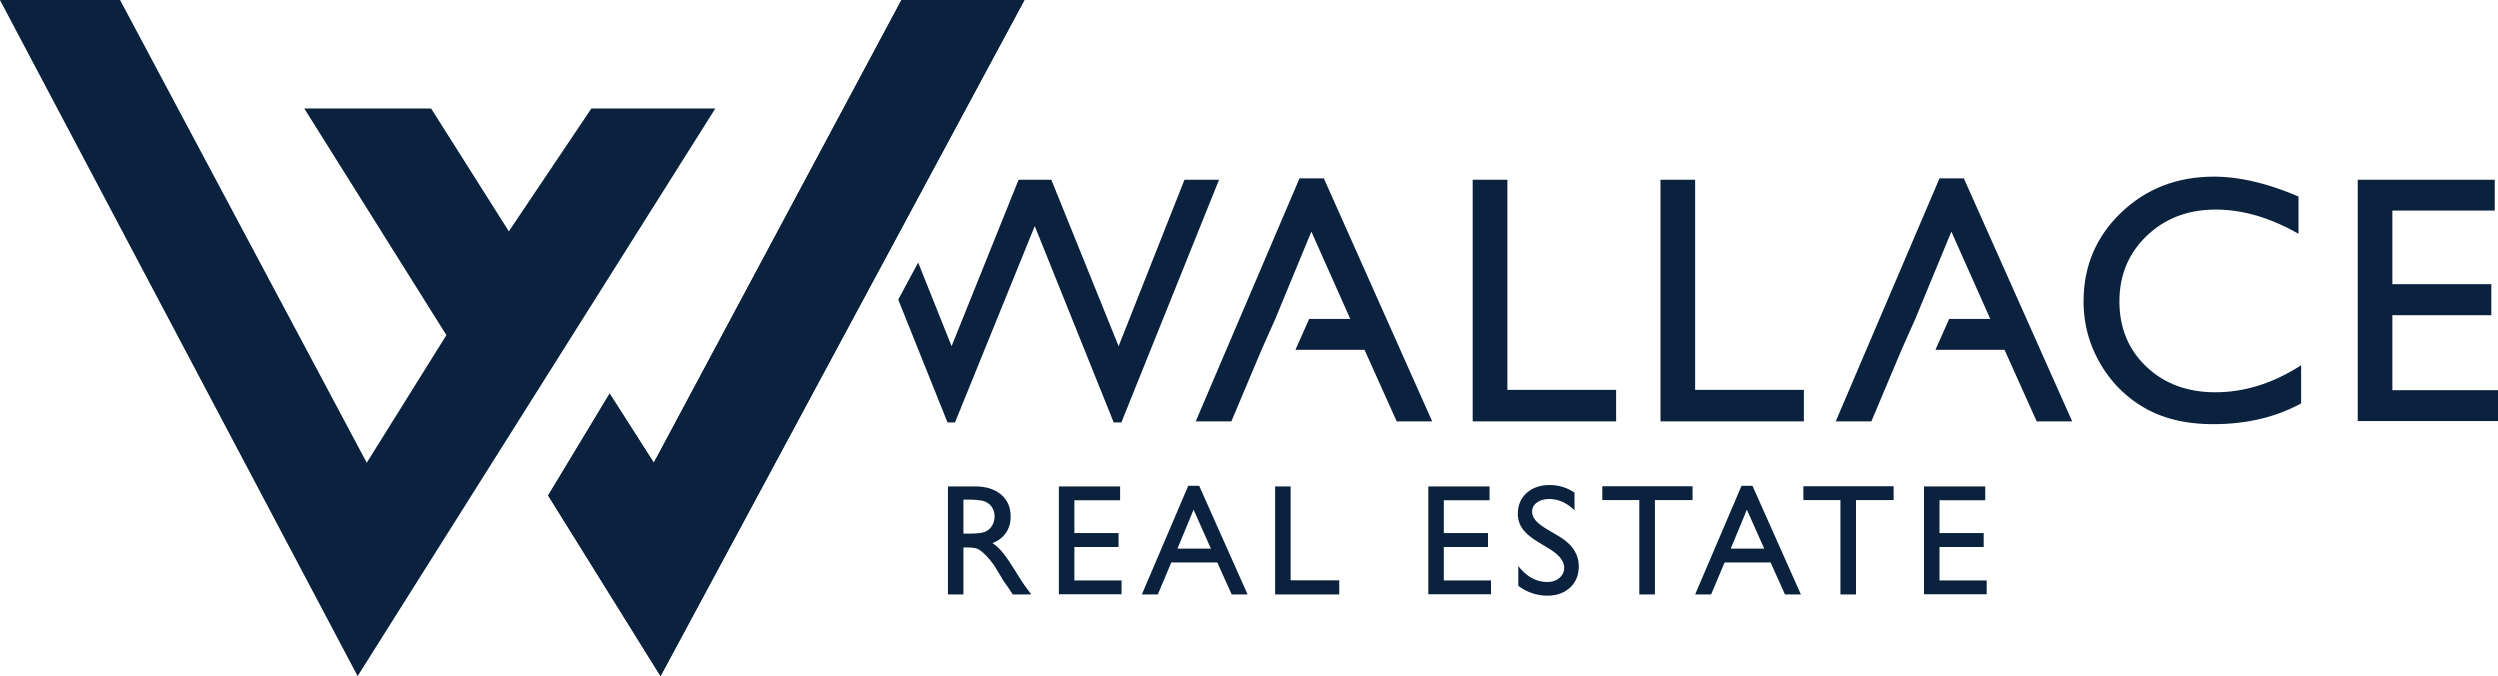 Wallace Real Estate